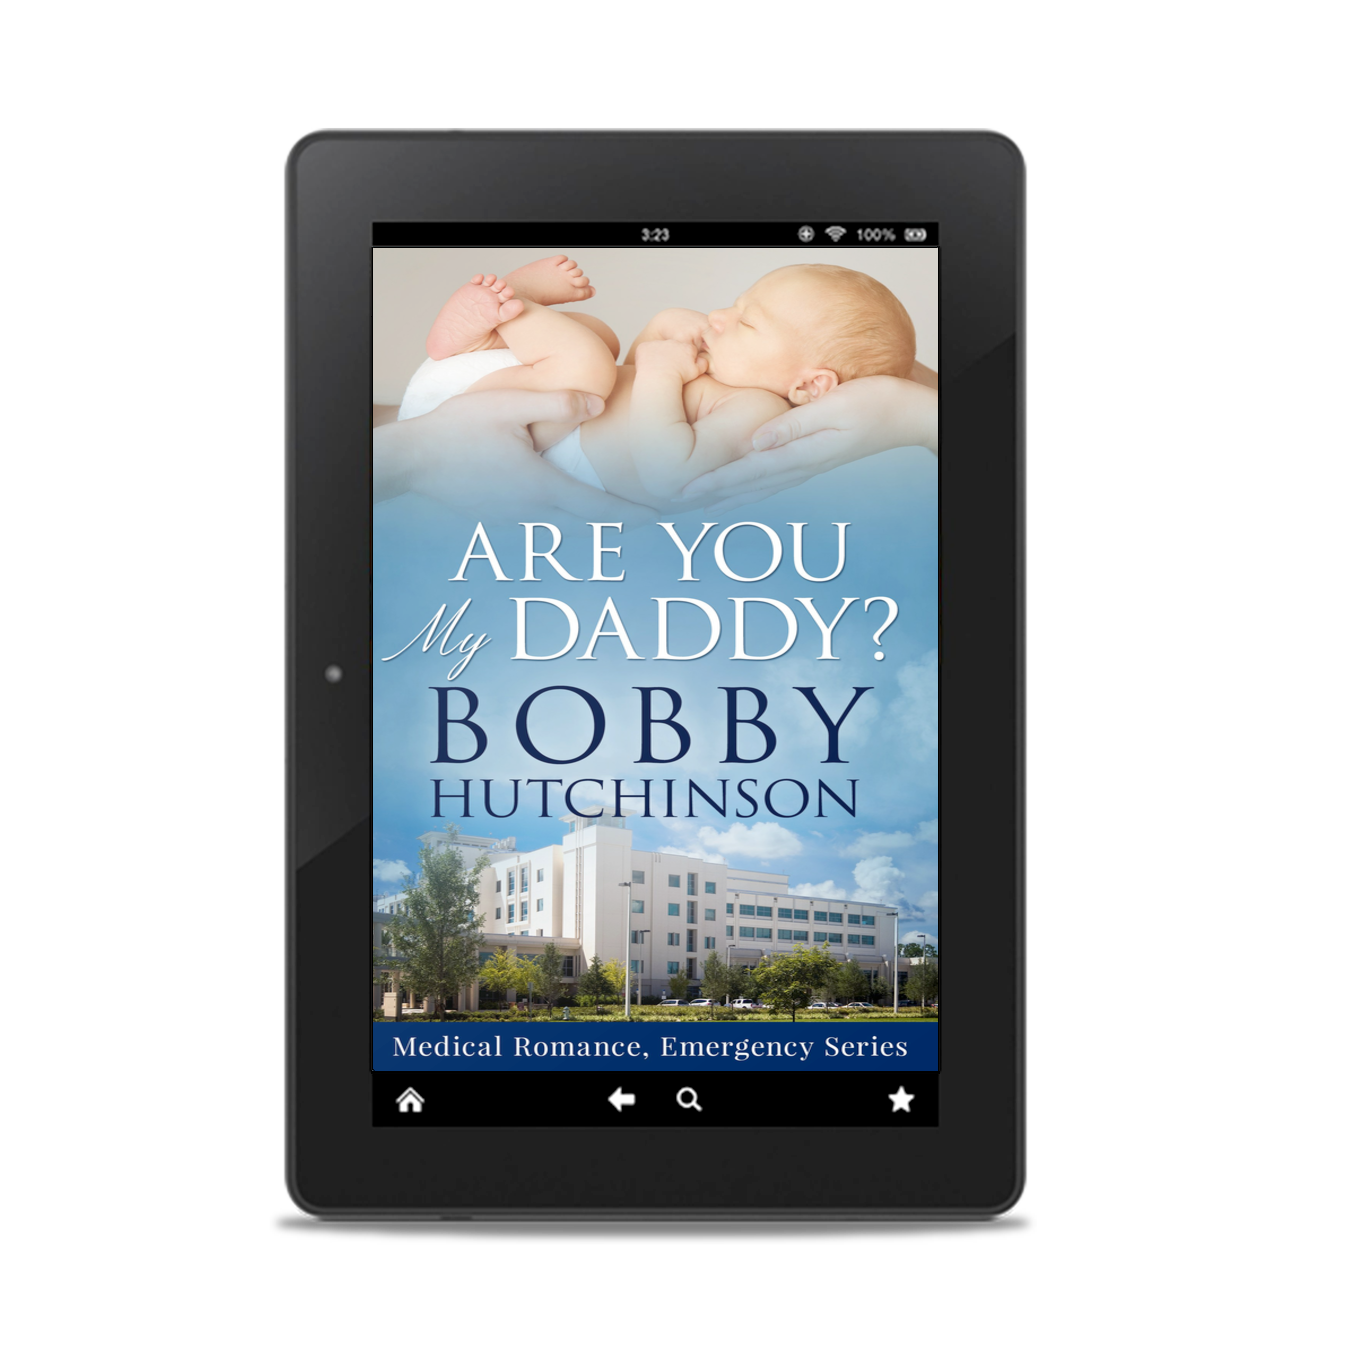 Are You My Daddy by Bobby Hutchinson